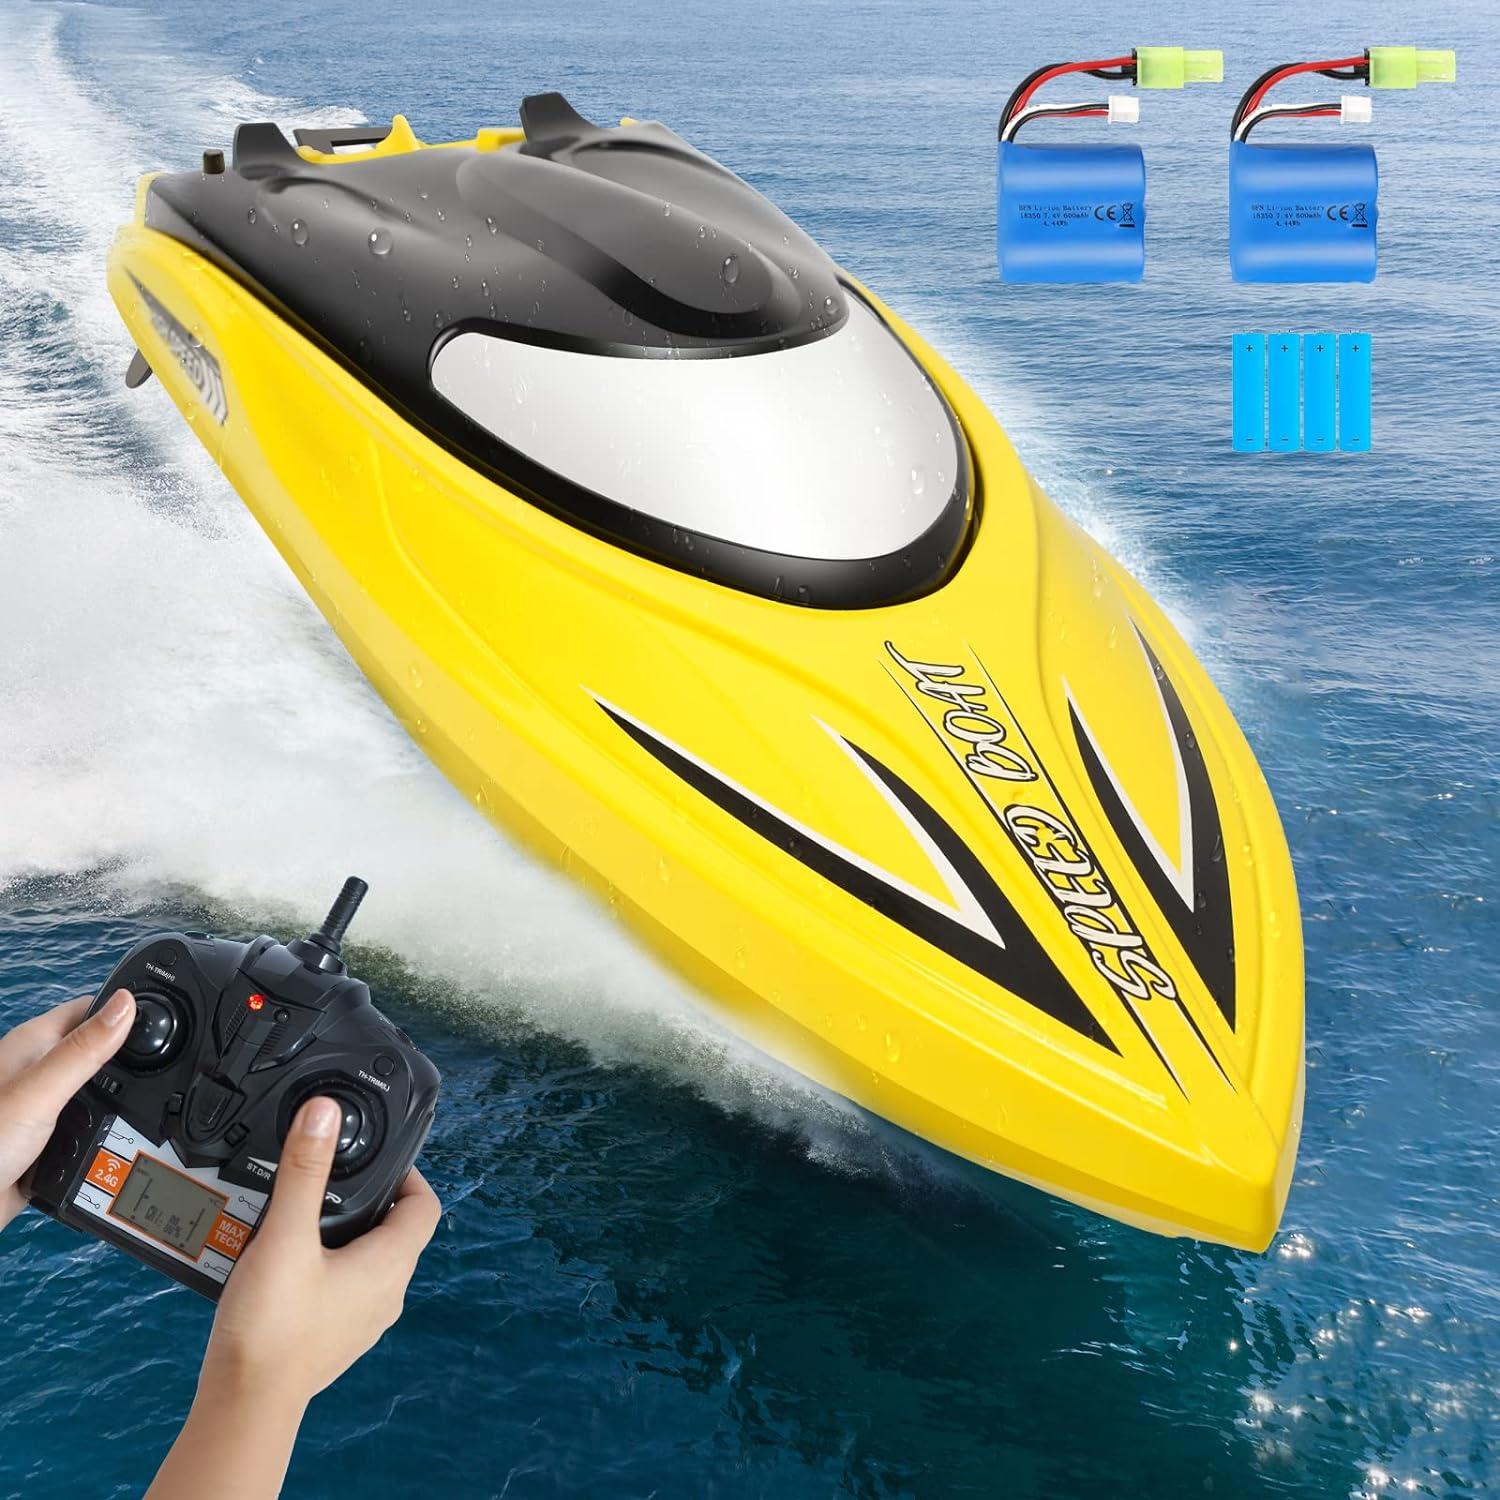 Zyerch Rc Boat:  Versatile and Exciting: The Zyerch RC Boat for All Activities 